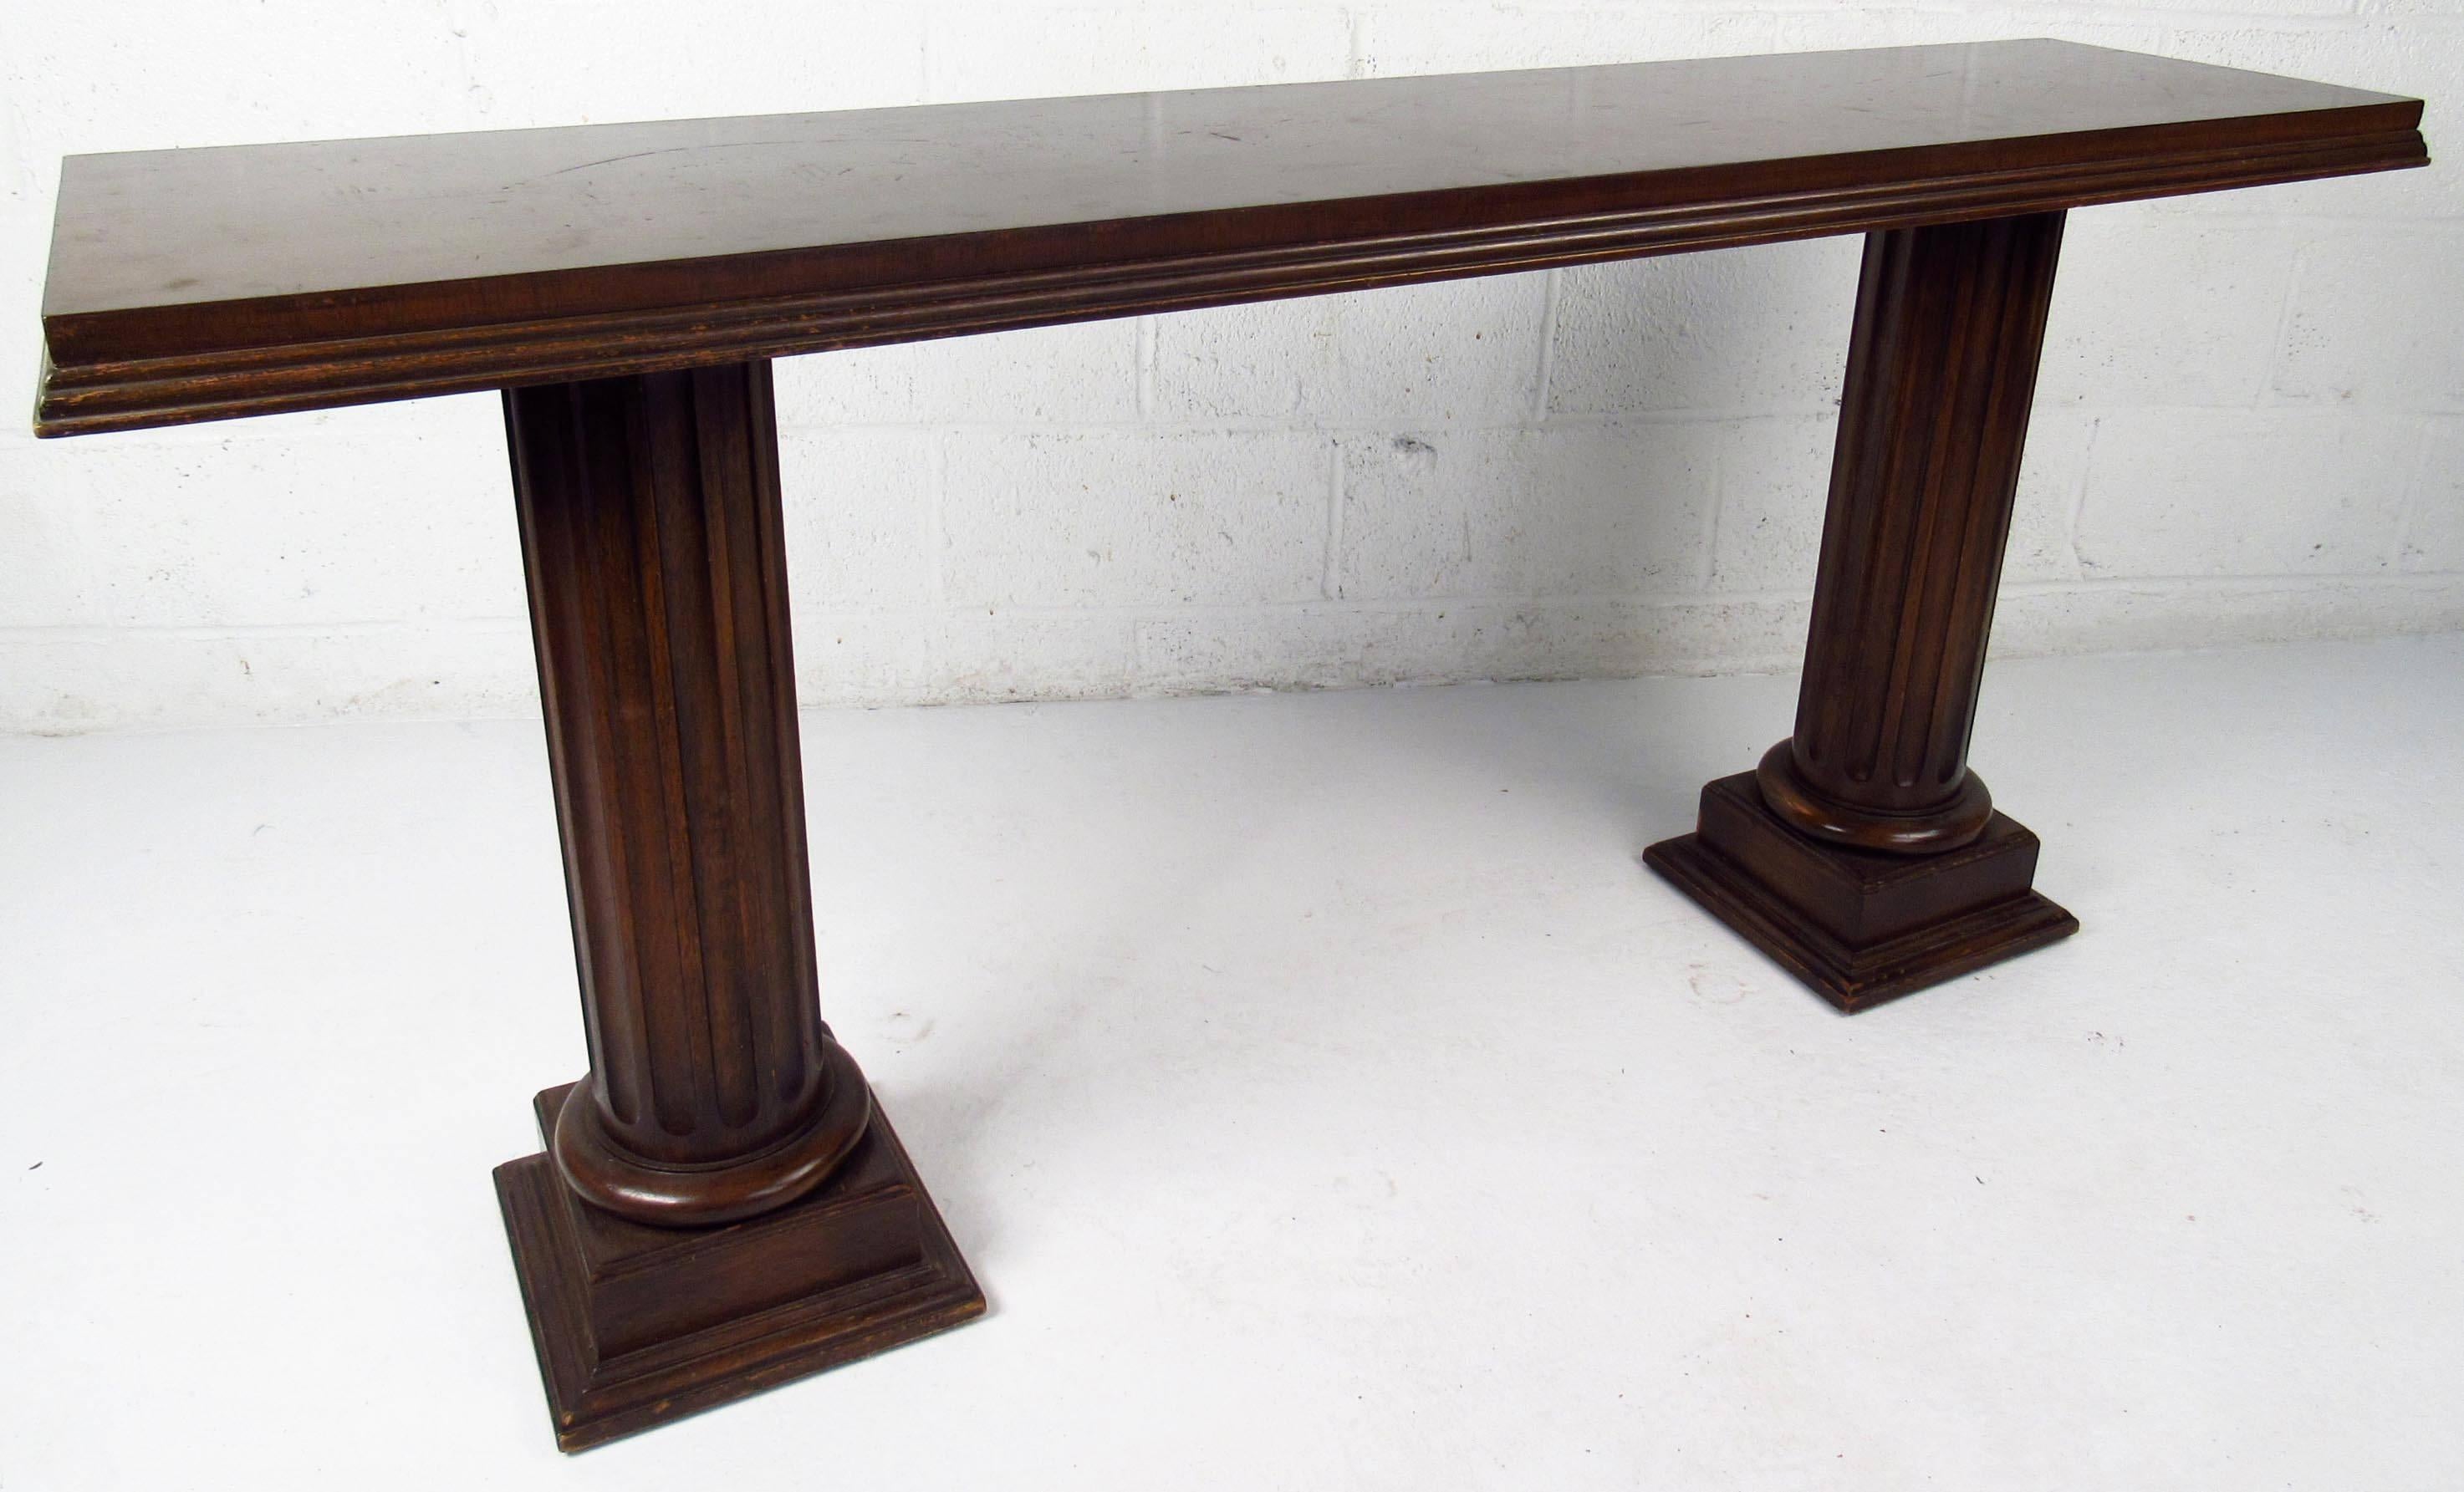 Vintage-modern sofa console table, features sculpted double column base and solid top with carved trim.

Please confirm item location NY or NJ with dealer.